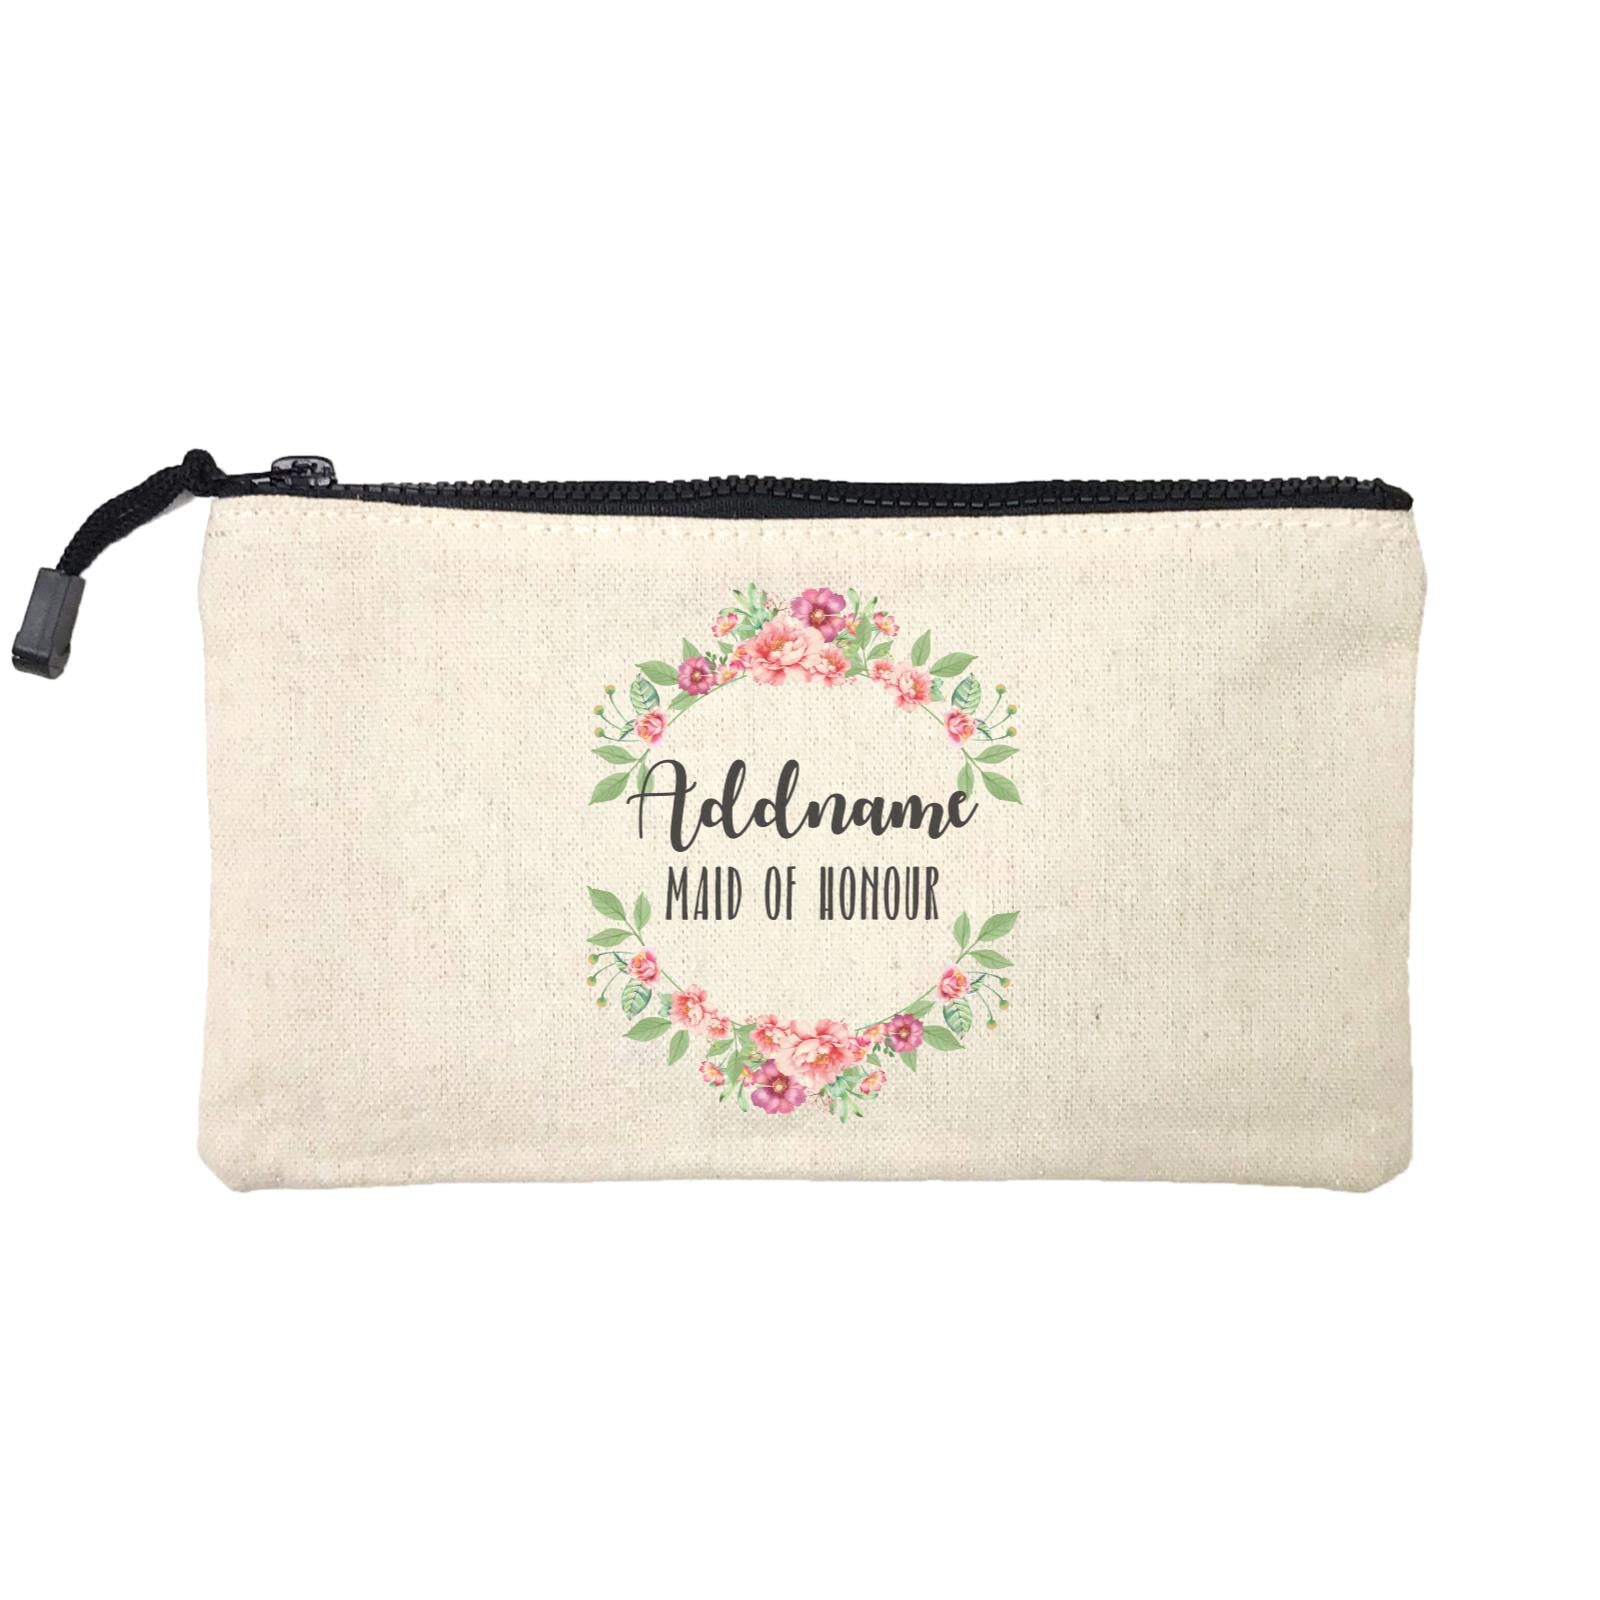 Bridesmaid Floral Sweet Coral Flower Wreath Maid Of Honour Addname Mini Accessories Stationery Pouch